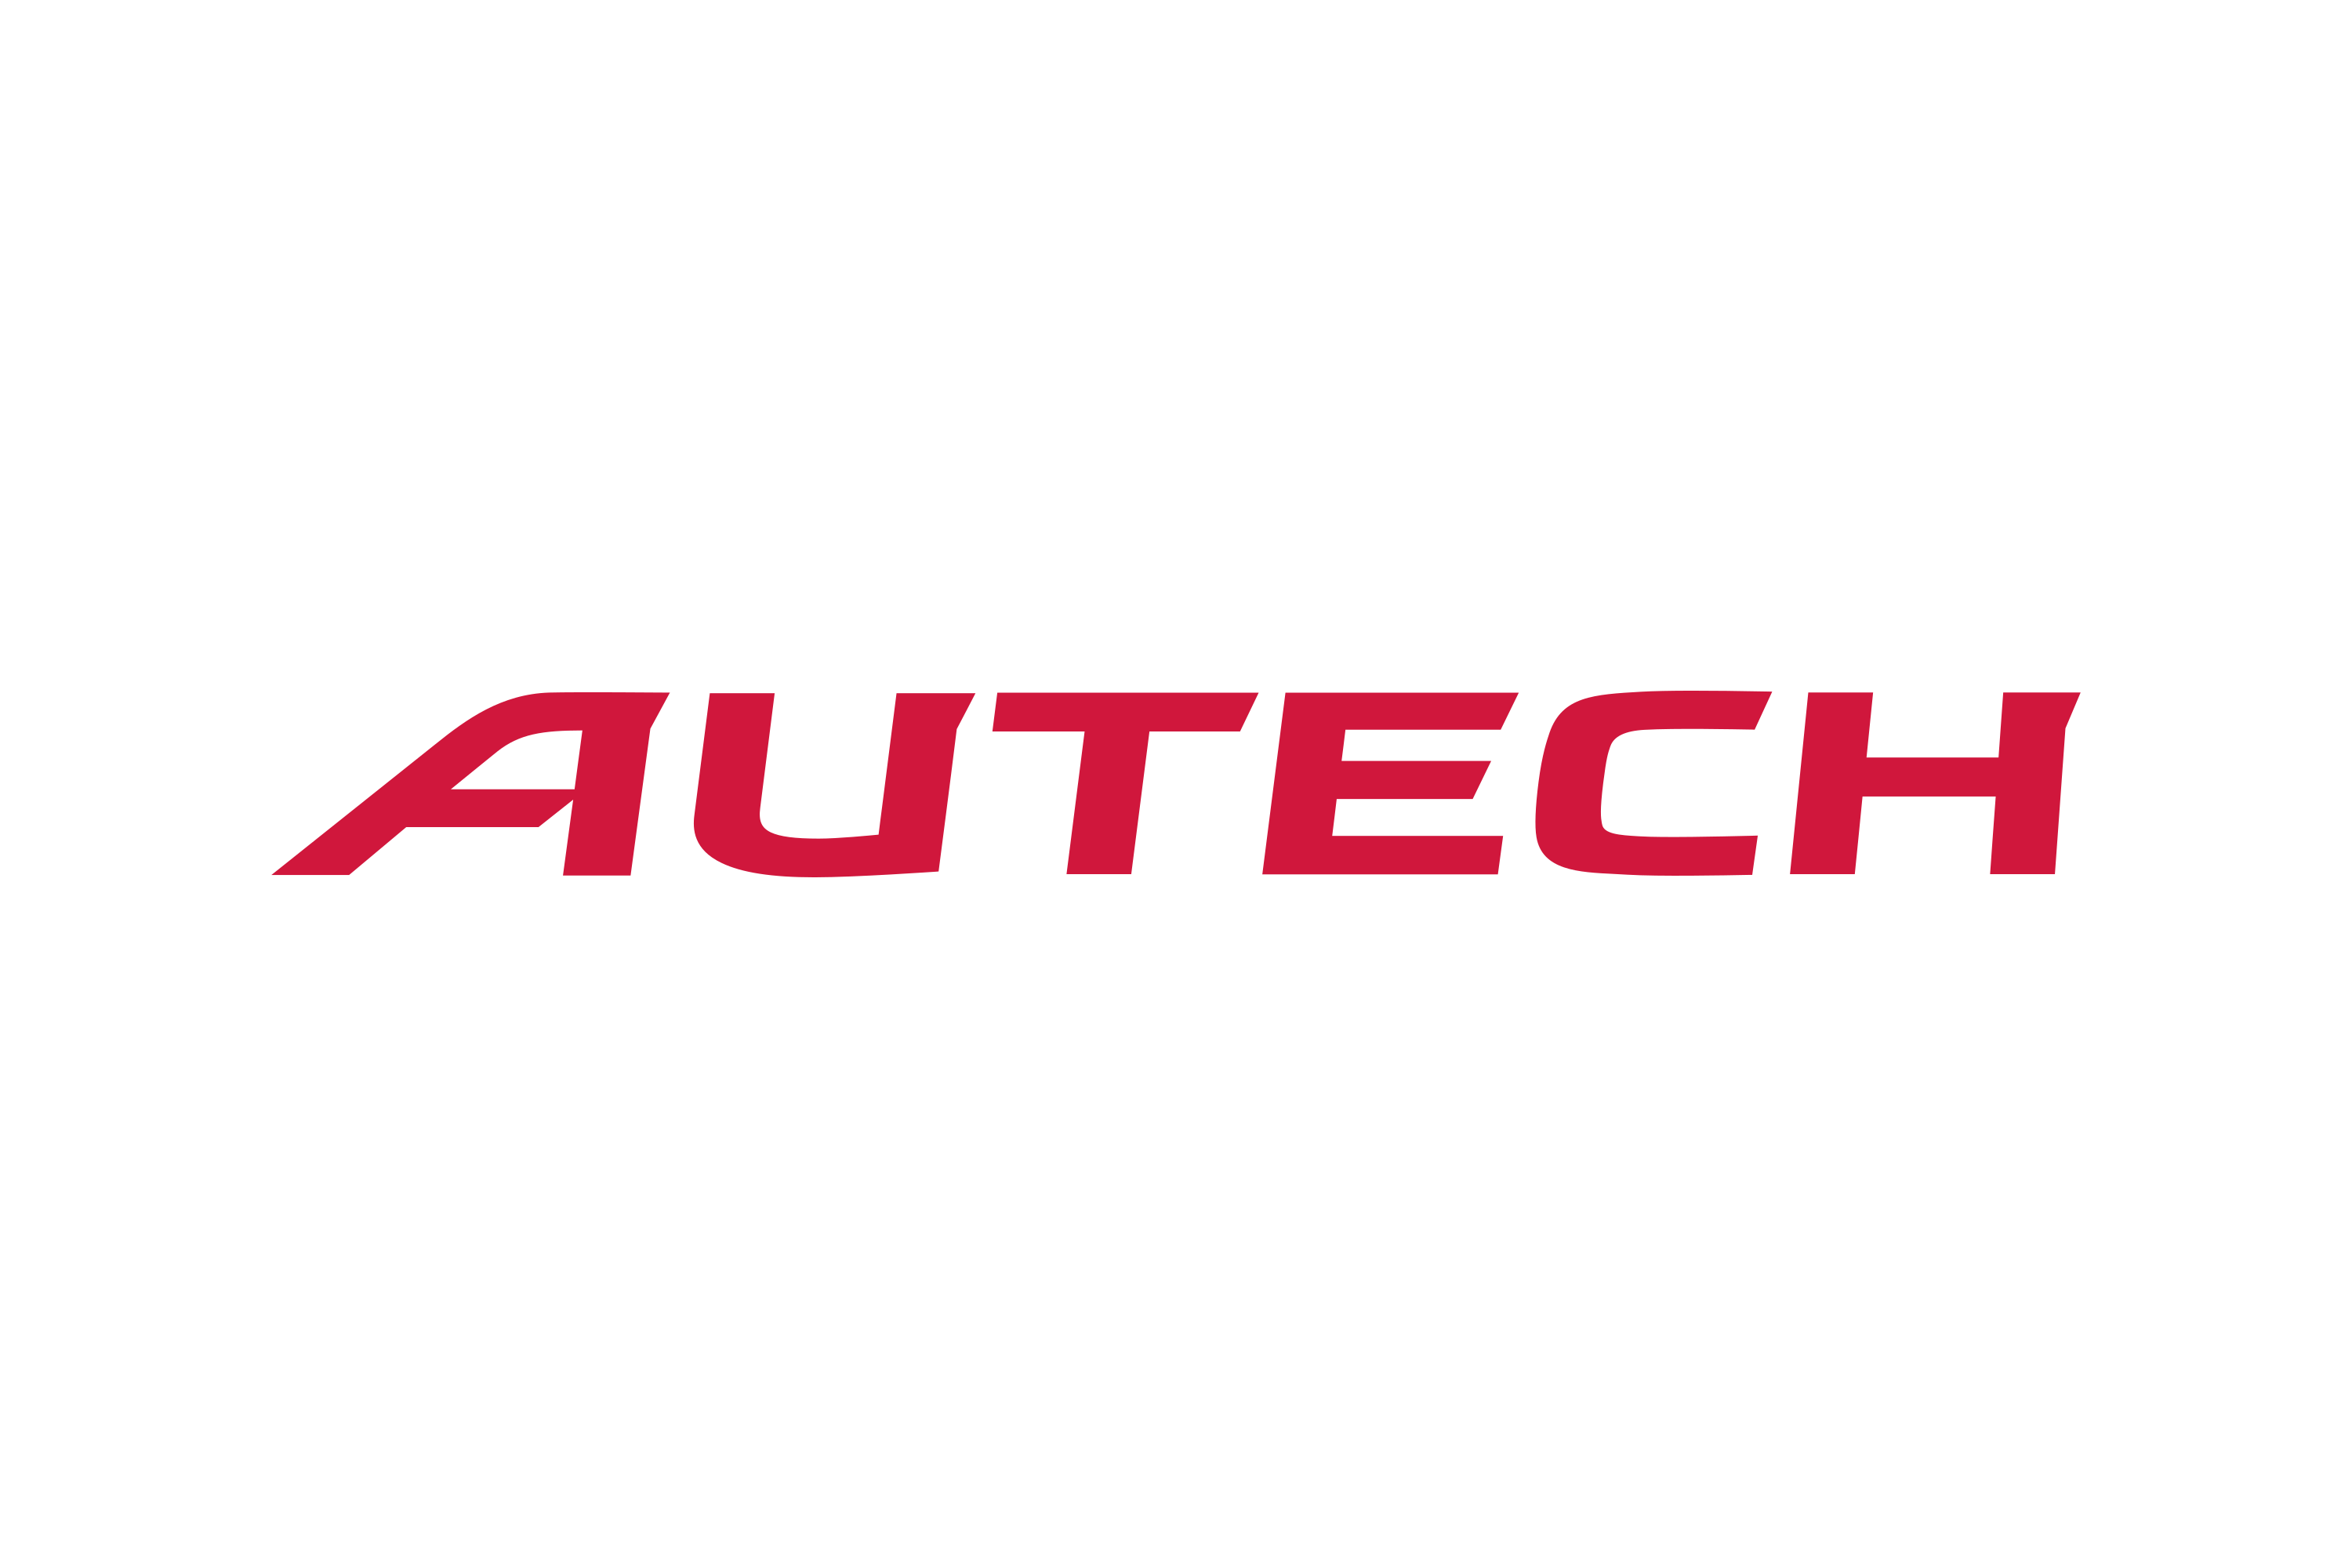 Download Autech Logo in SVG Vector or PNG File Format - Logo.wine